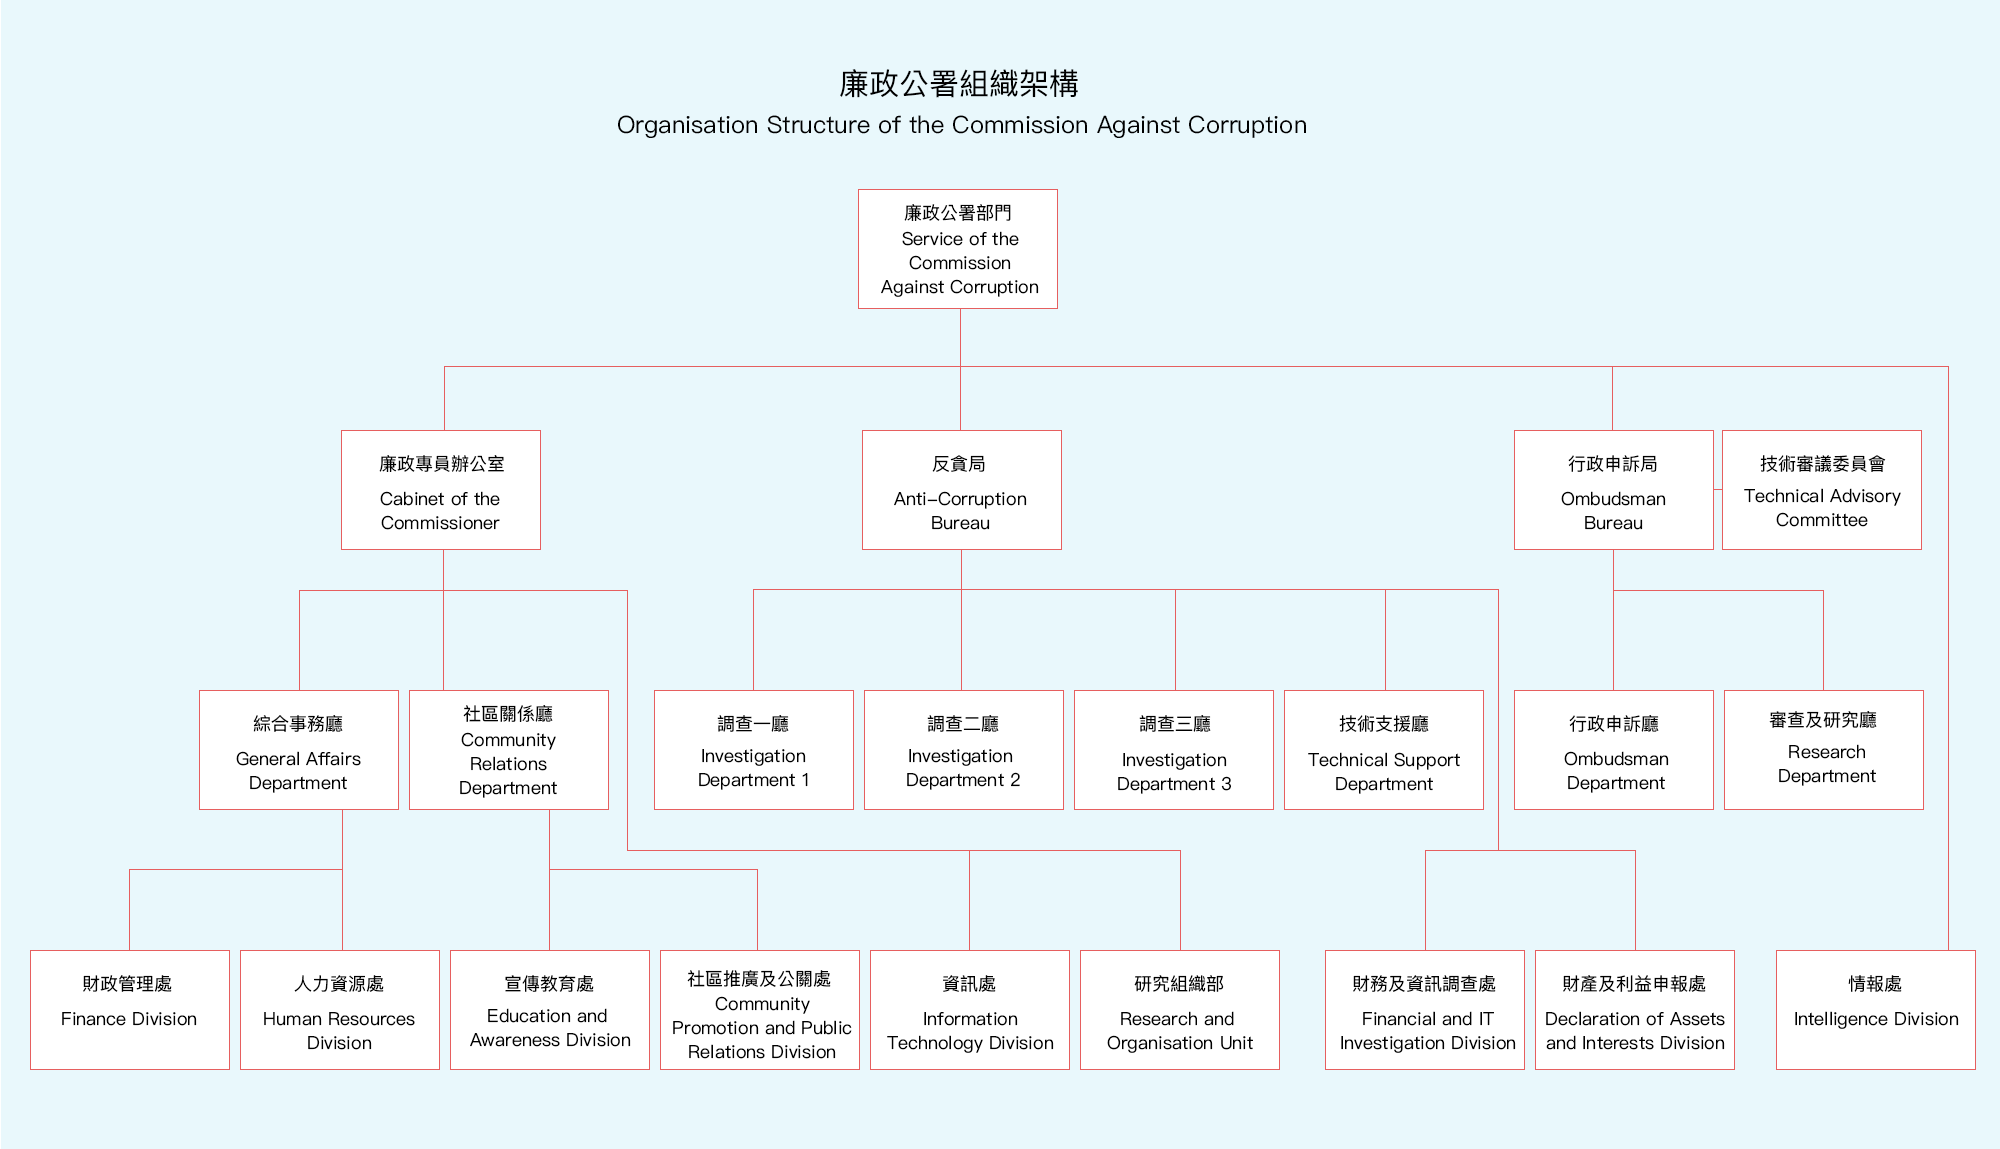 Picture - ICAC organizational structure